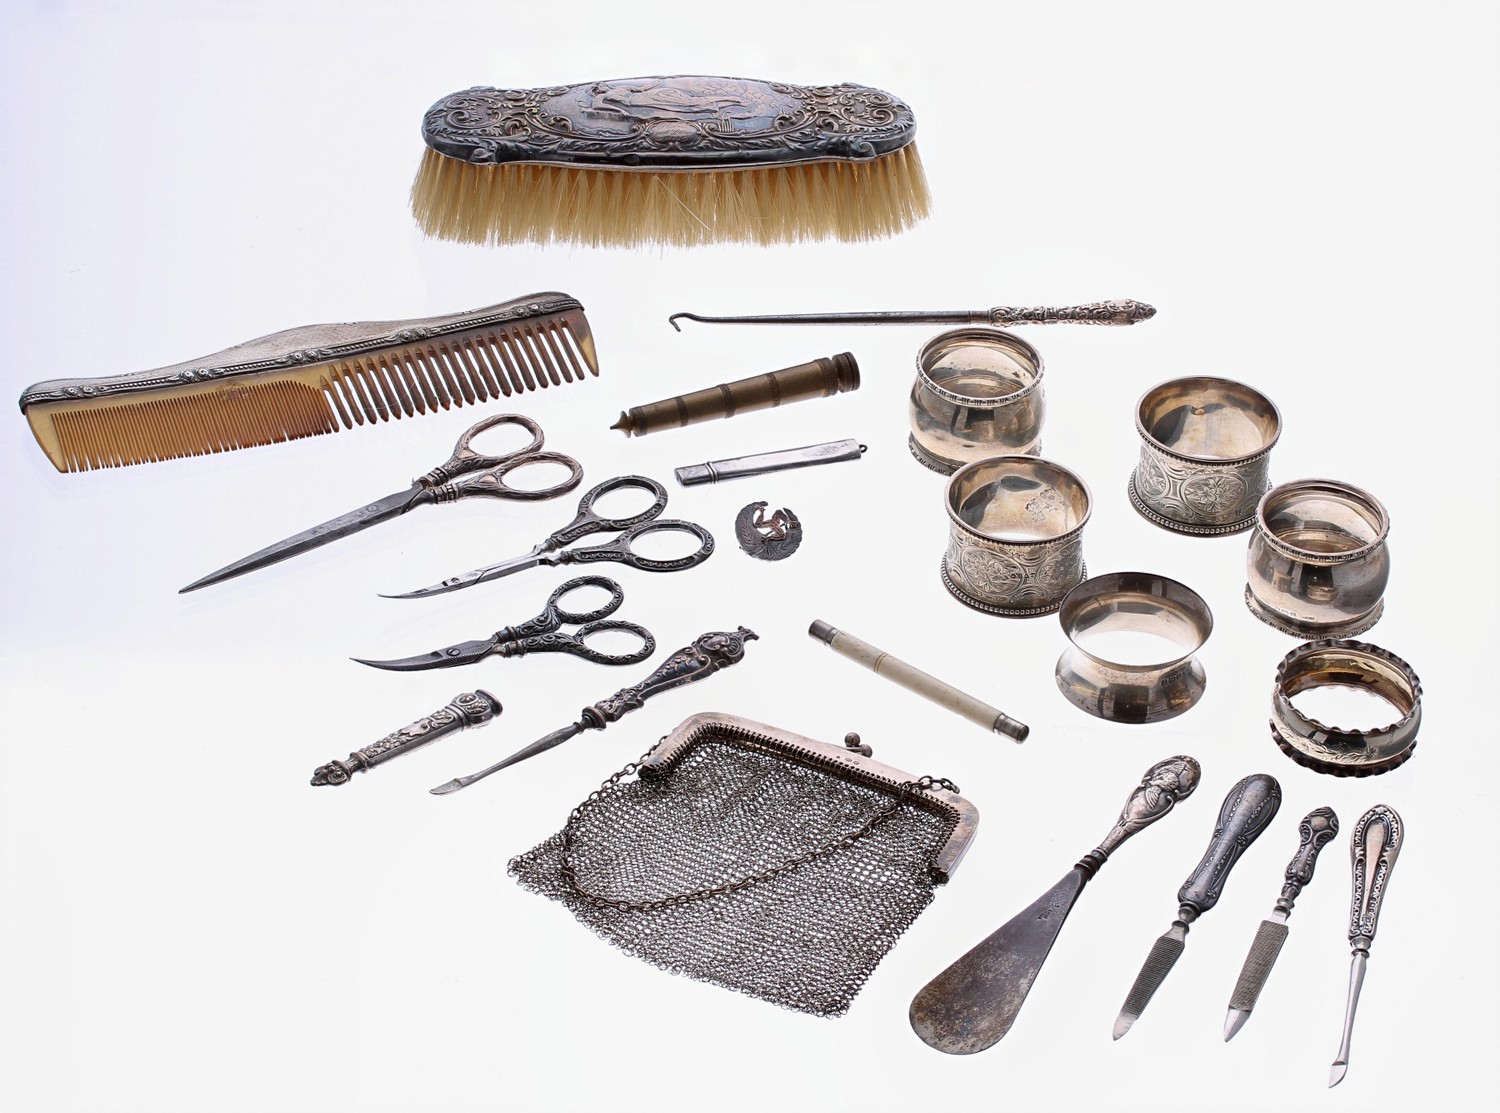 Selected silver pieces primarily dressing items including a brush, comb, vanity scissors, files etc;